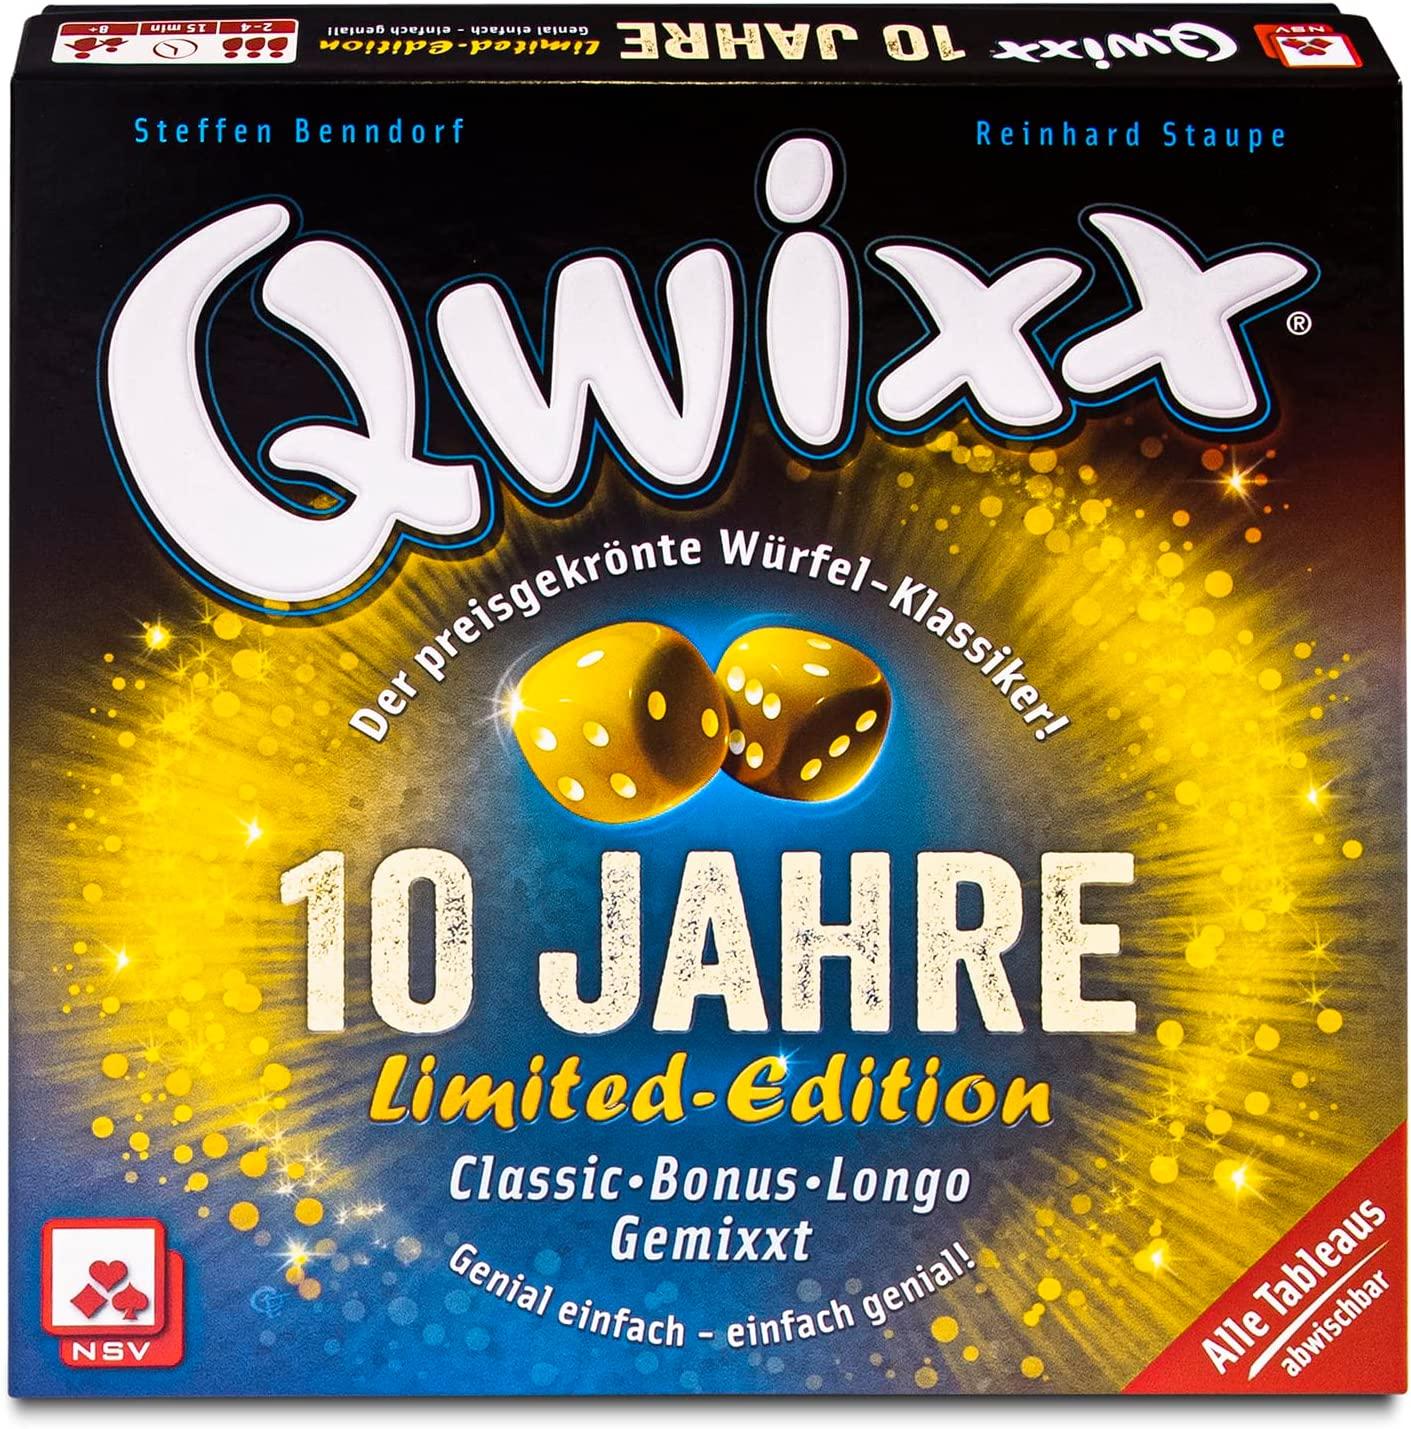 Qwixx - Limited-Edition